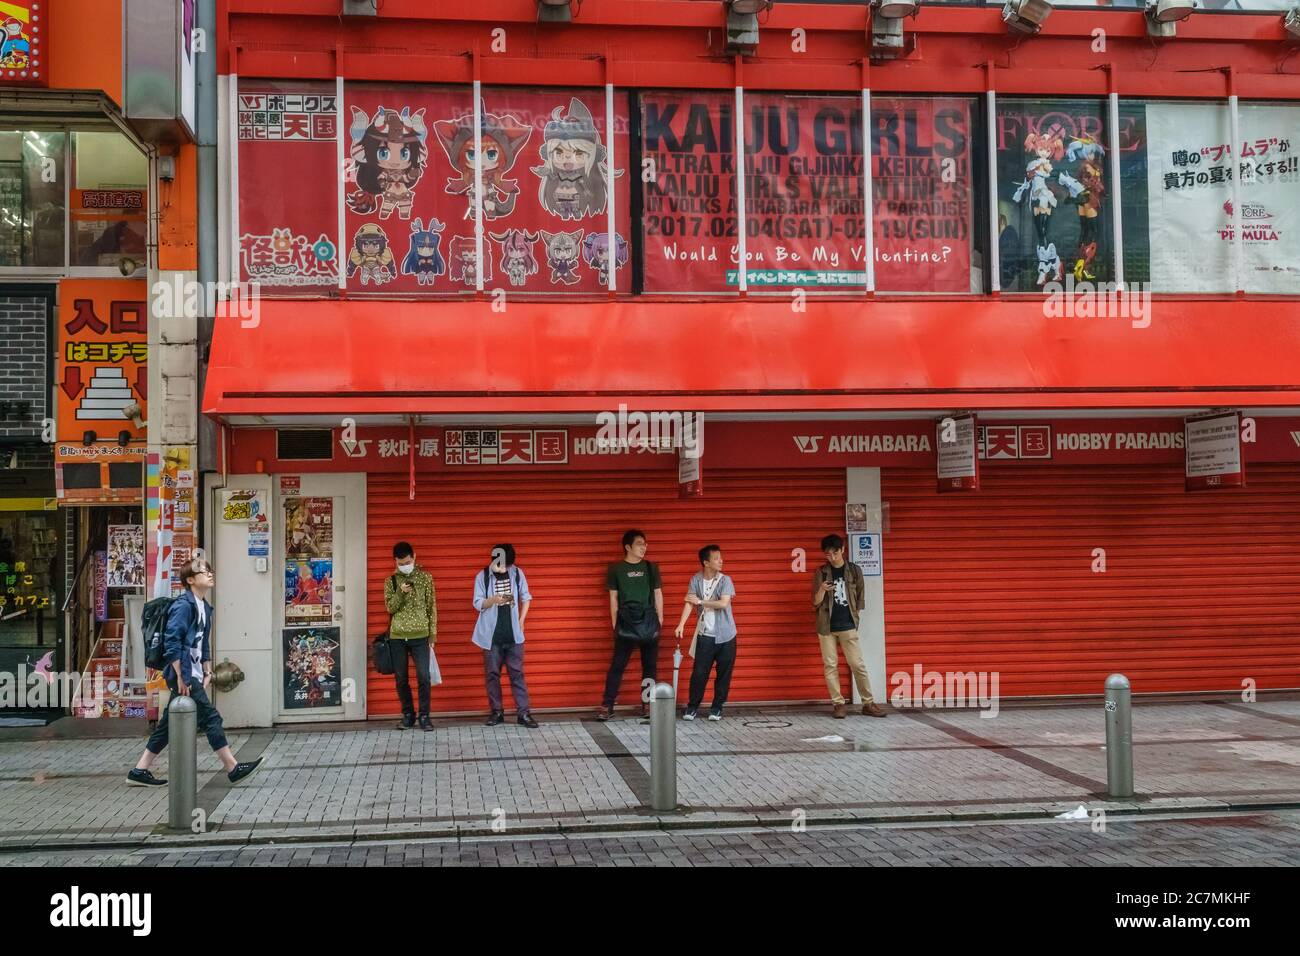 Tokyo, Japan - June 23, 2018: Young male gamers in line waiting to enter video game contests in the Akihabara district of Tokyo. Stock Photo